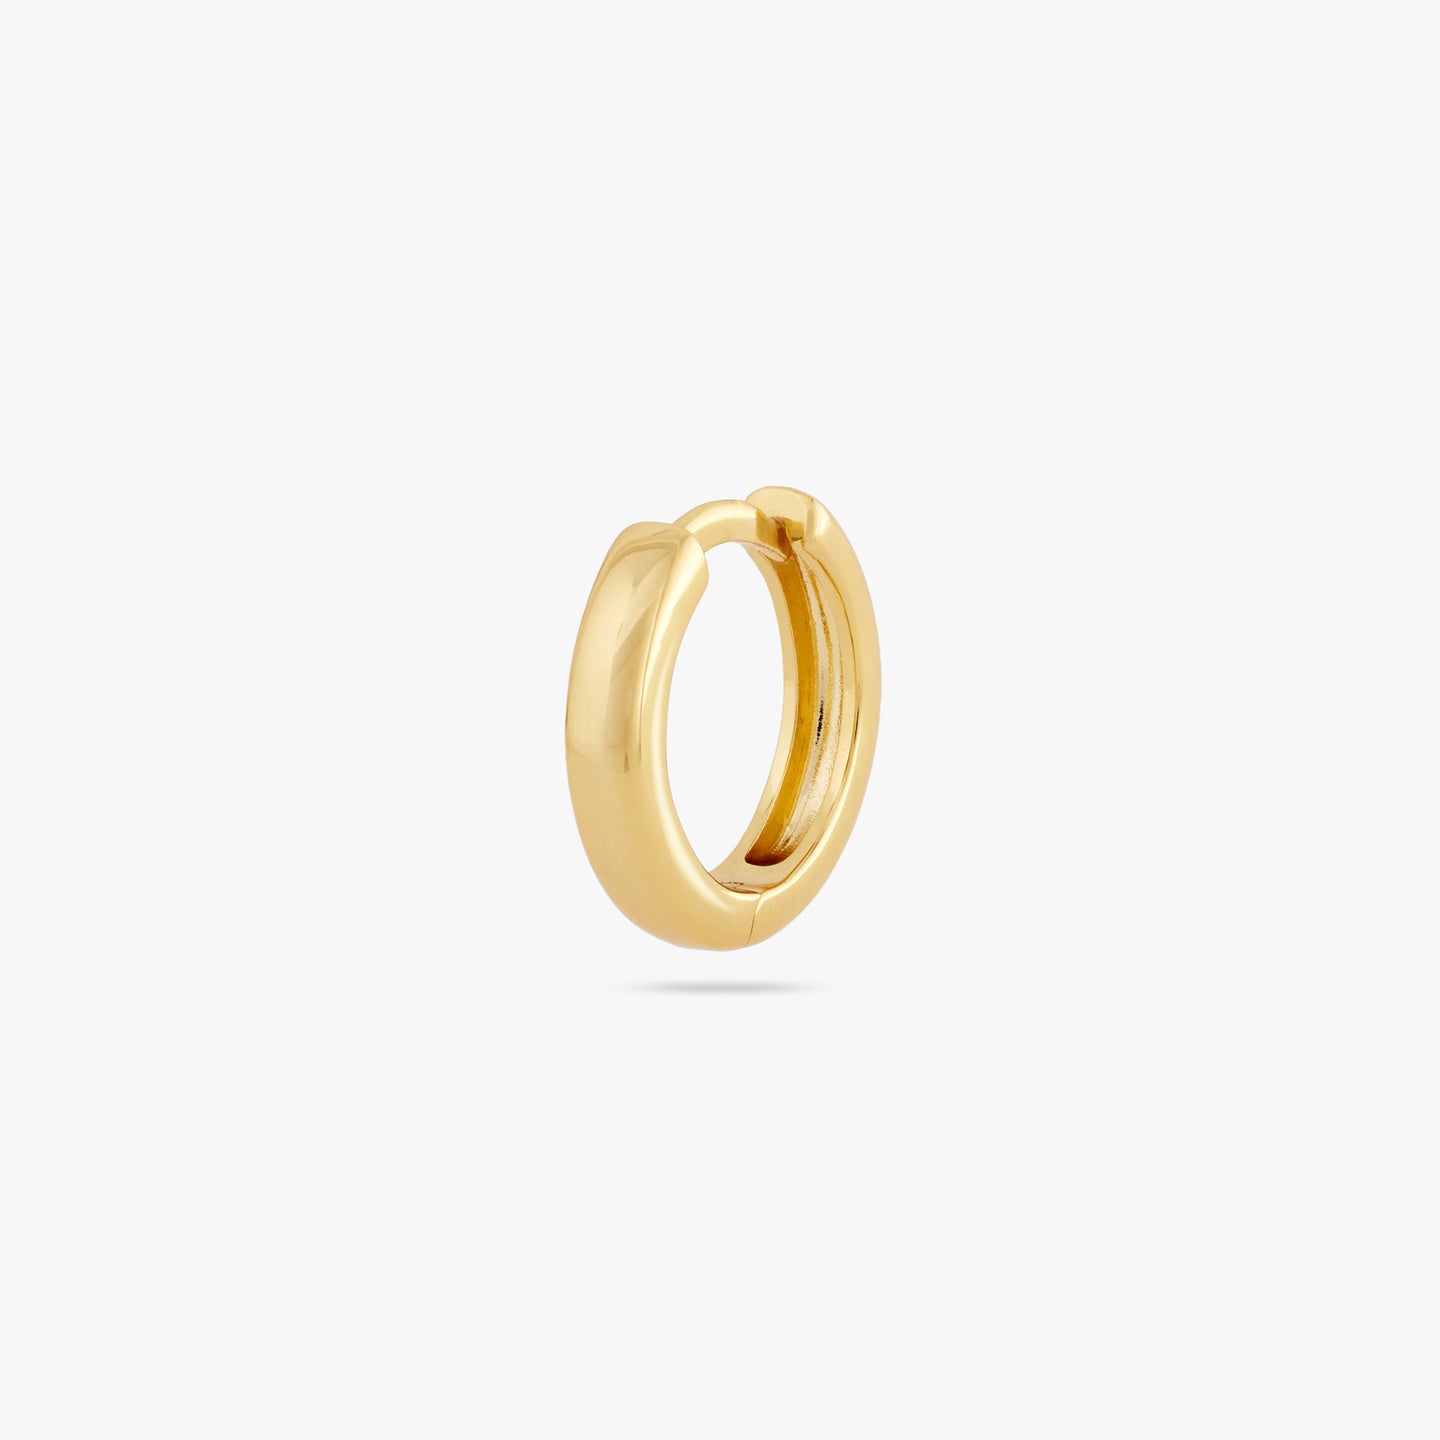 A small bulky and chunky shaped gold huggie color:null|gold